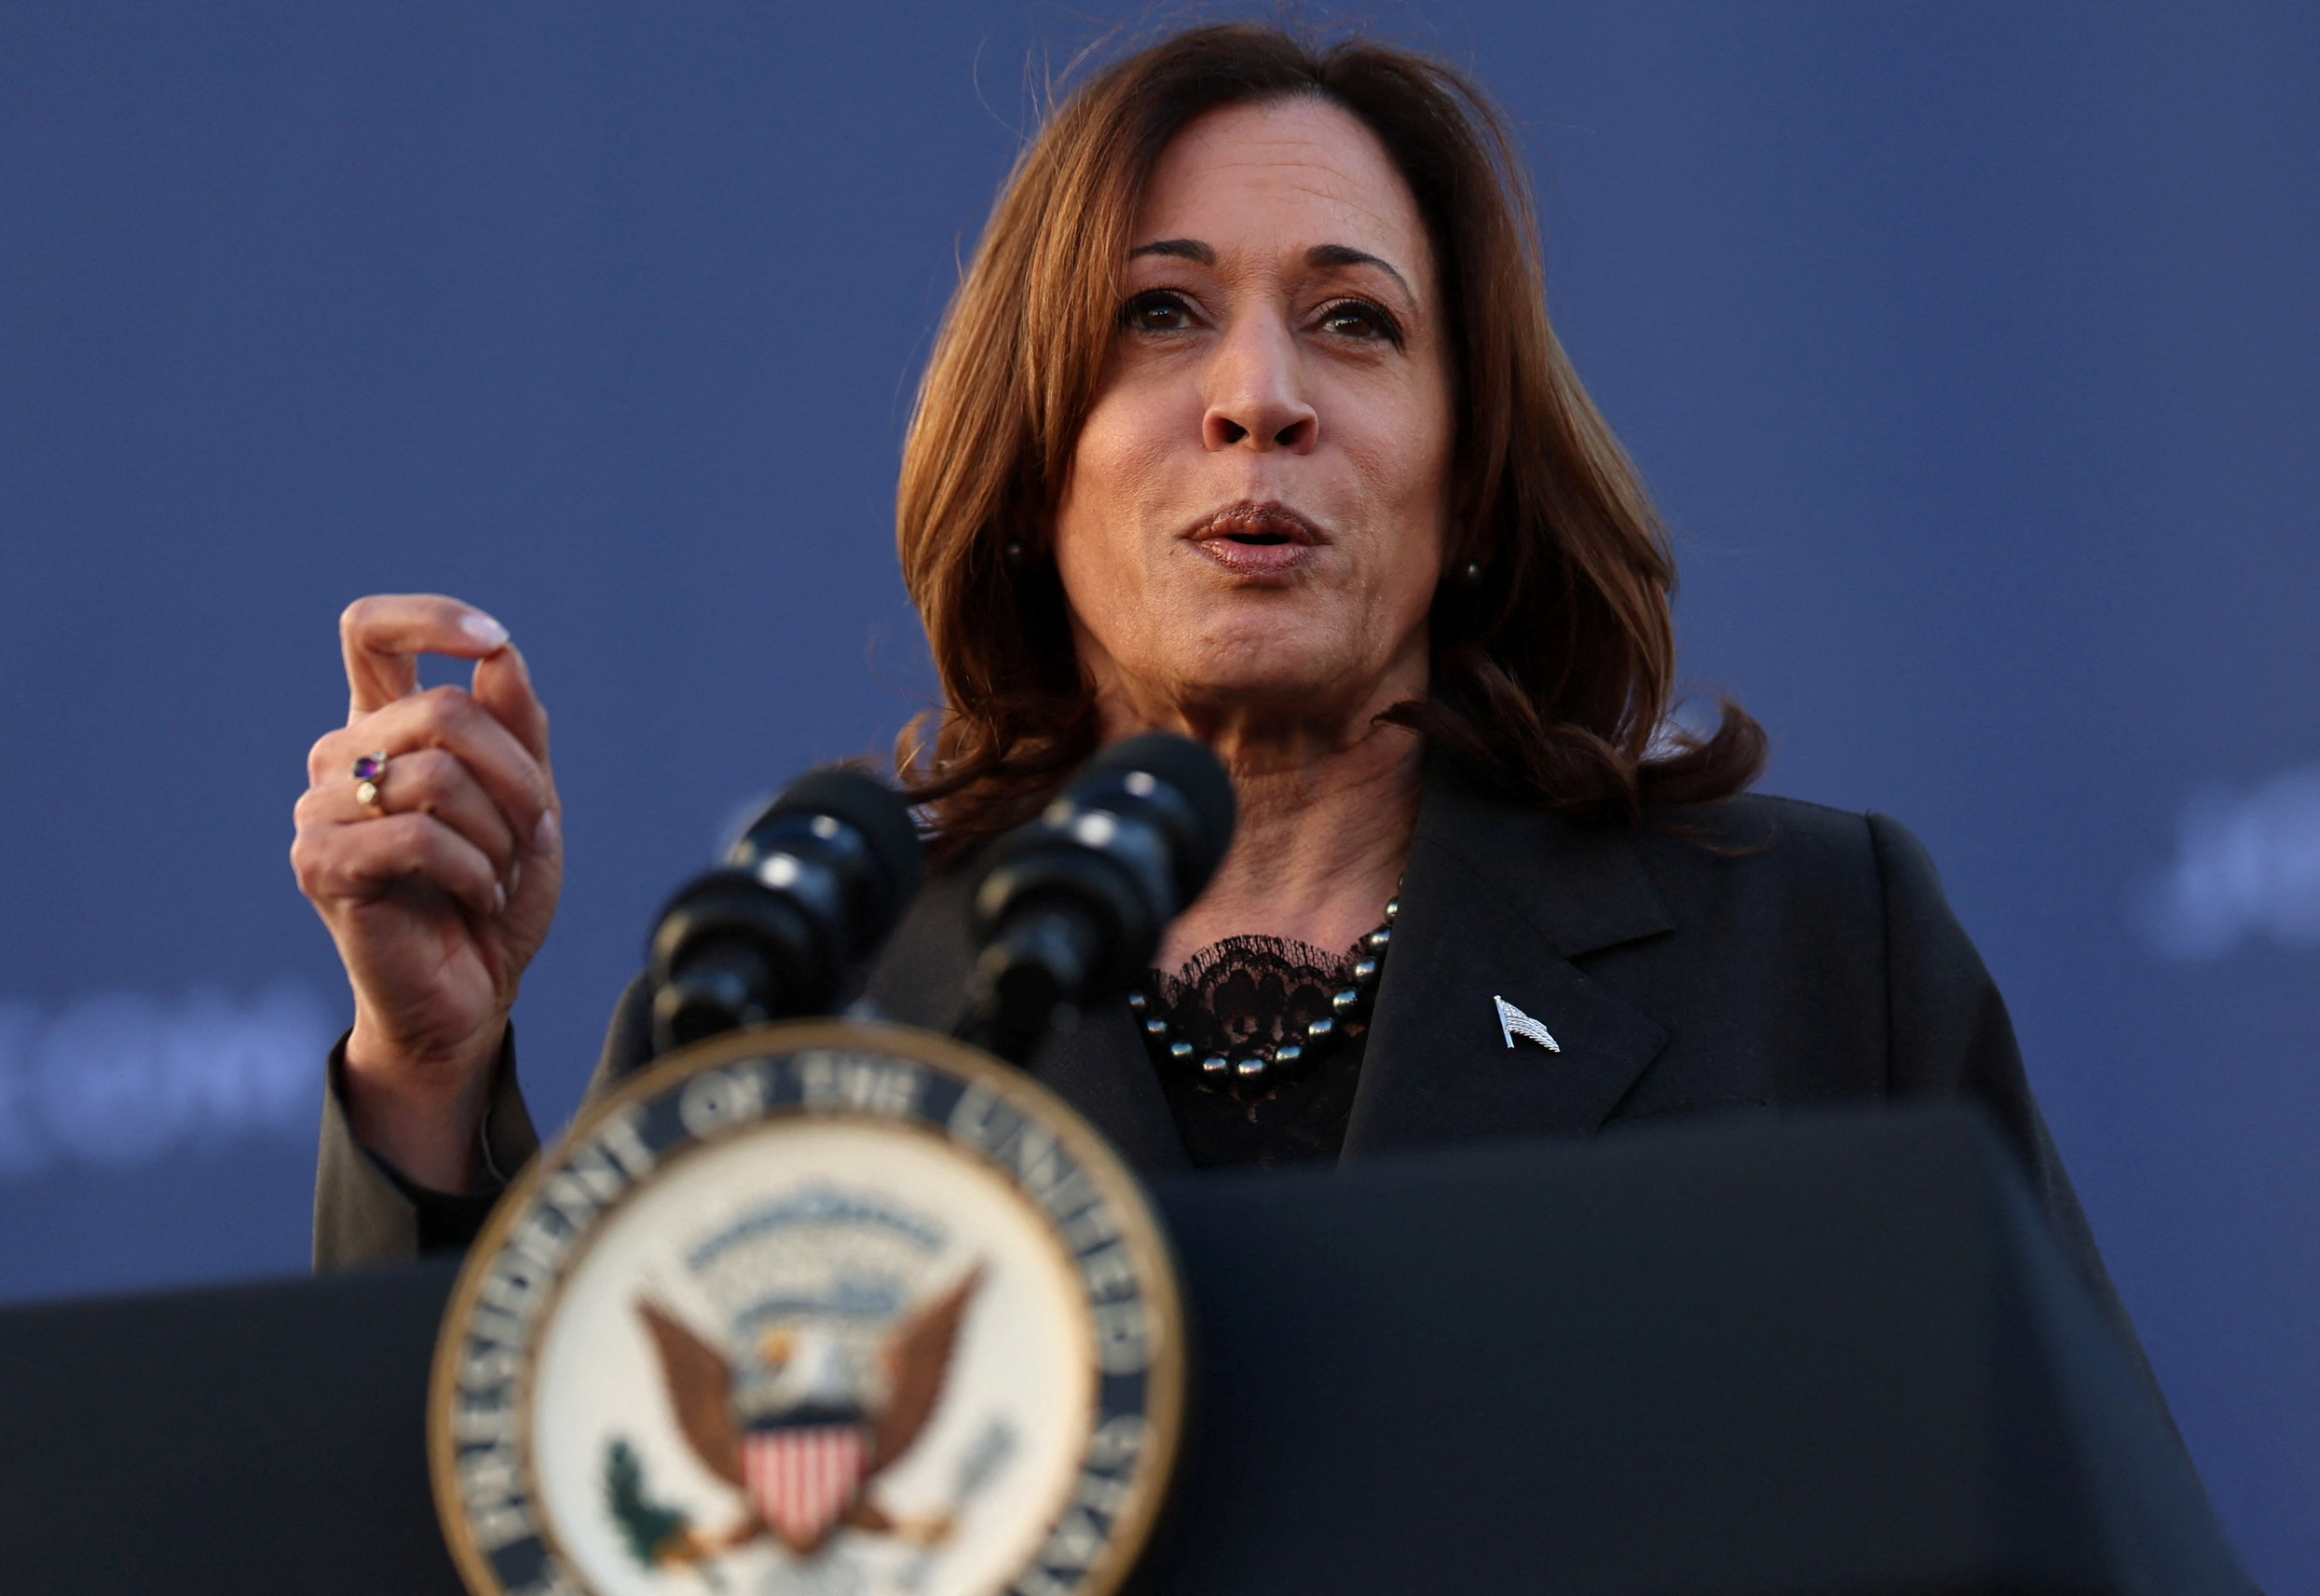 U.S. Vice President Kamala Harris delivers a speech during a Get Out The Vote rally ahead of the Democratic presidential primaries at South Carolina State University in Orangeburg, South Carolina, U.S., February 2, 2024. REUTERS/Leah Millis/File Photo